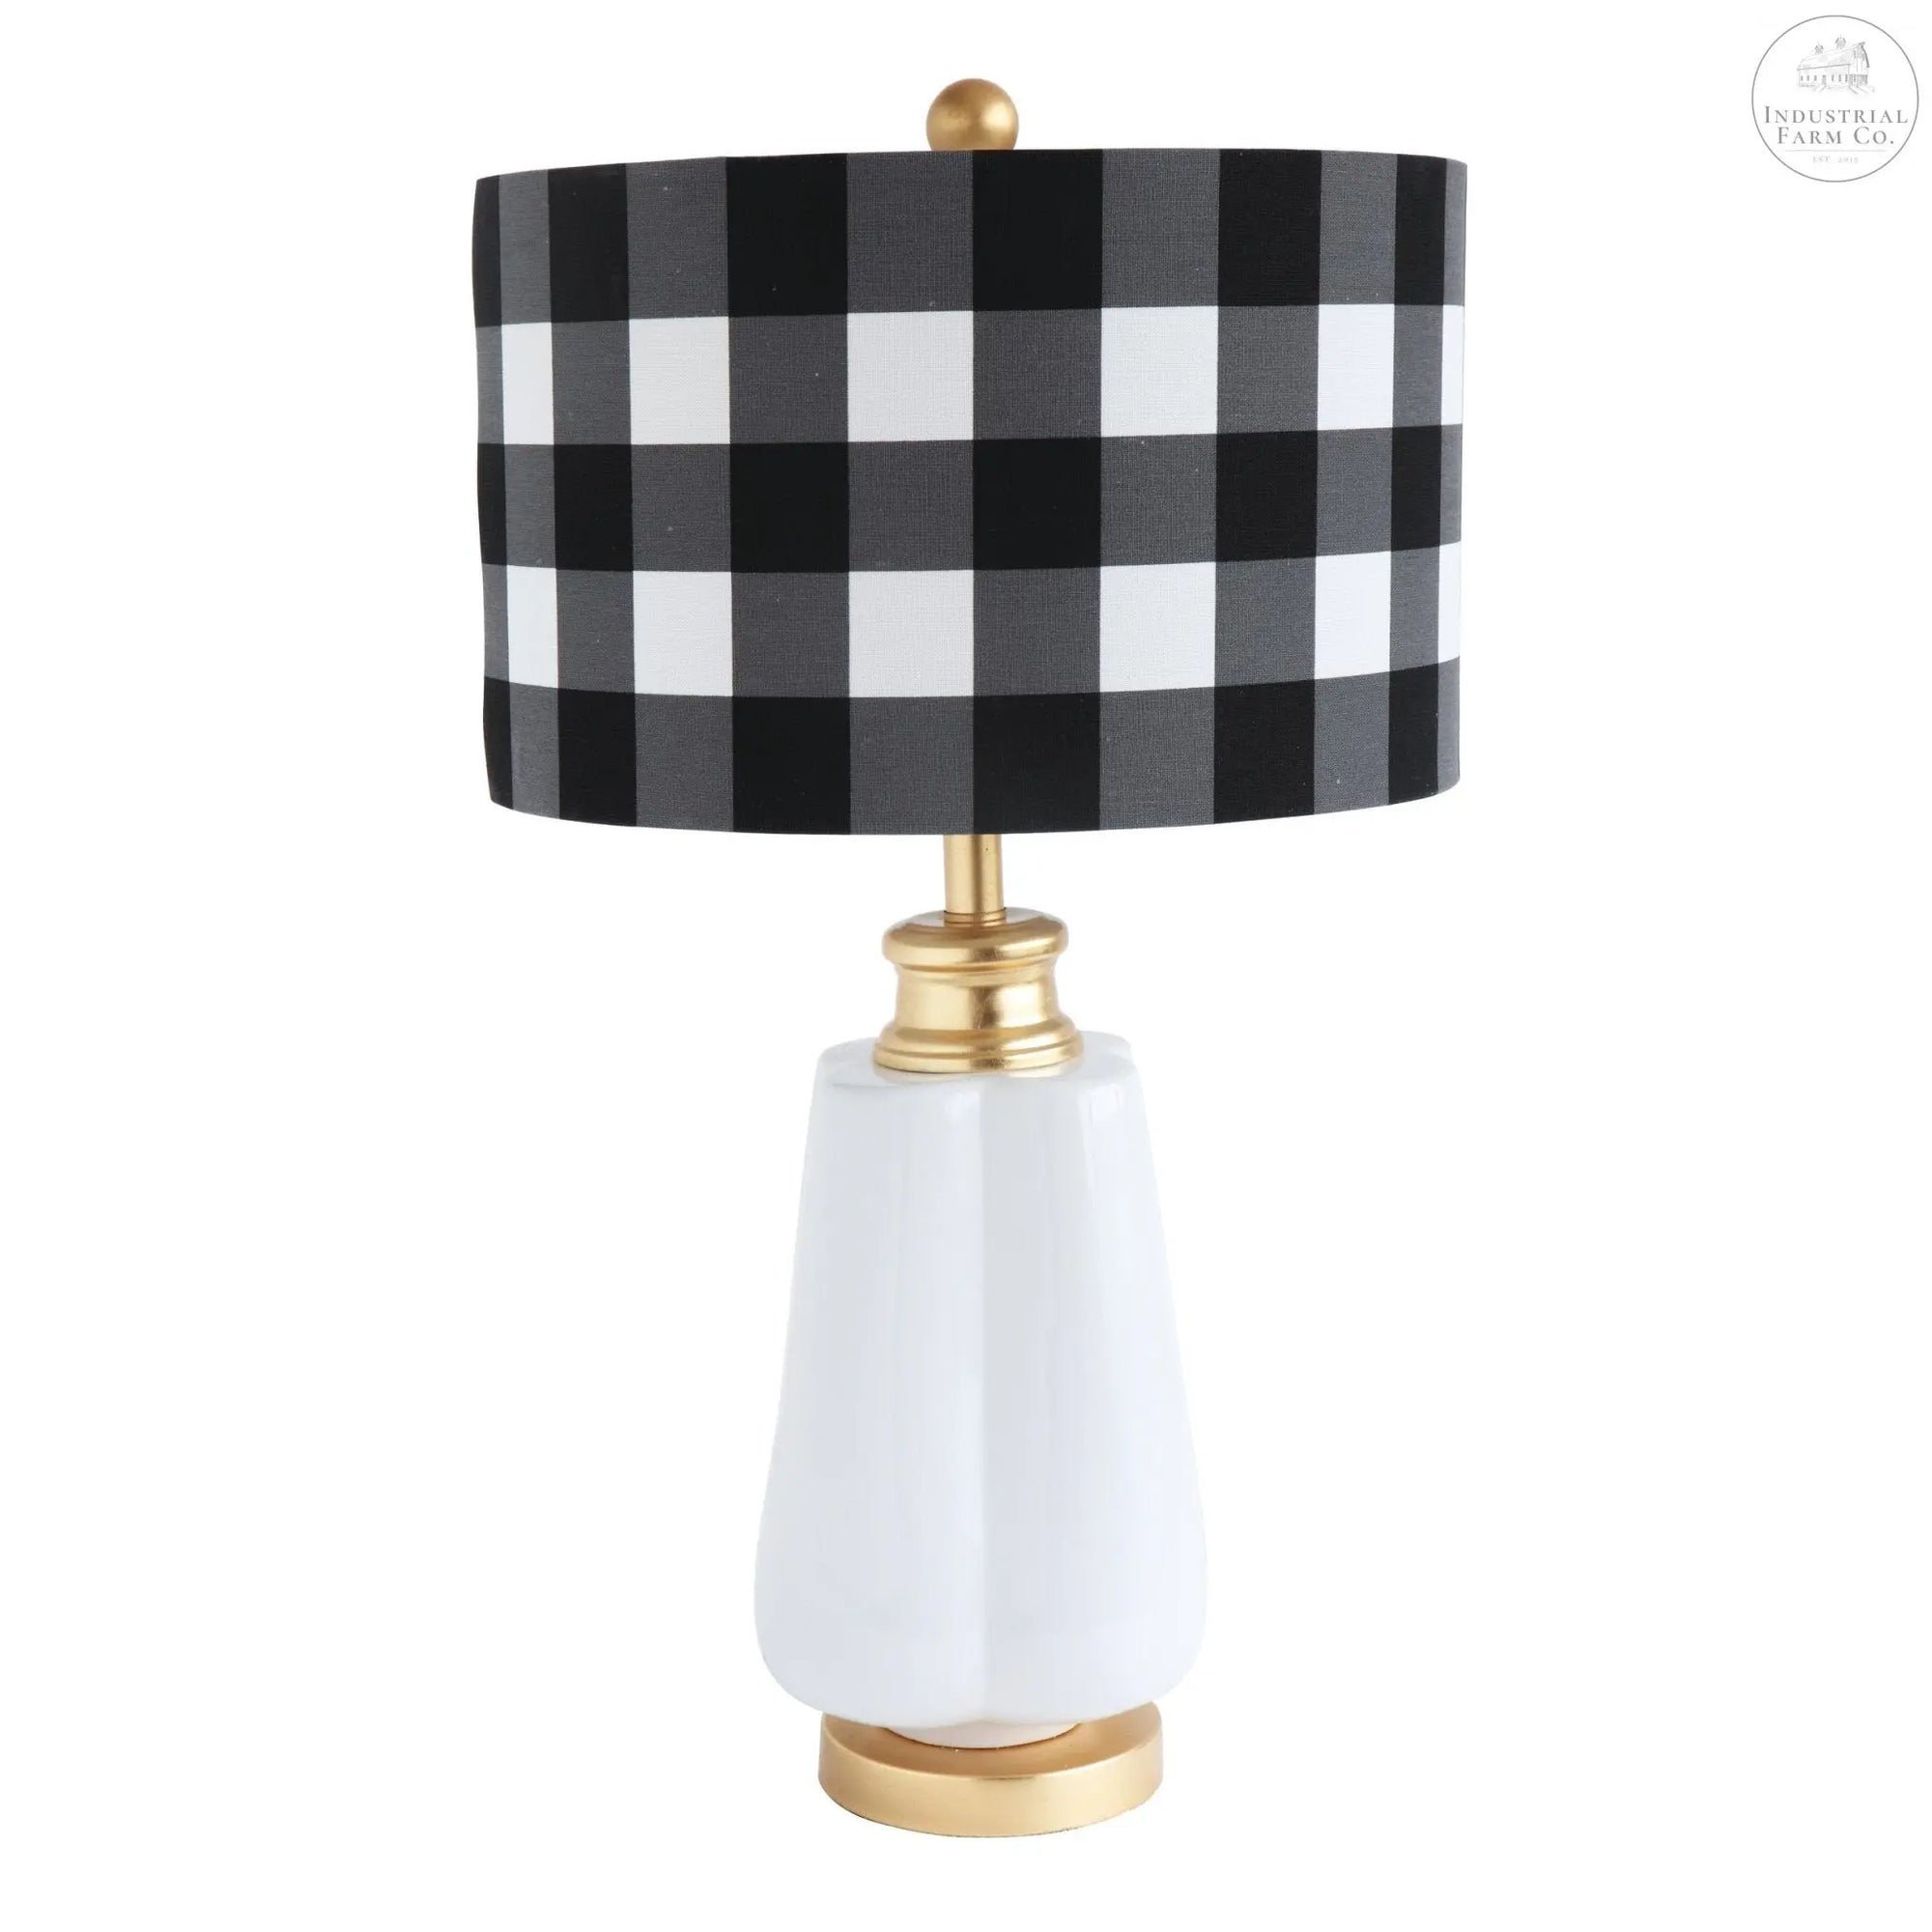 The Carrie Style Table Lamp  Default Title   | Industrial Farm Co